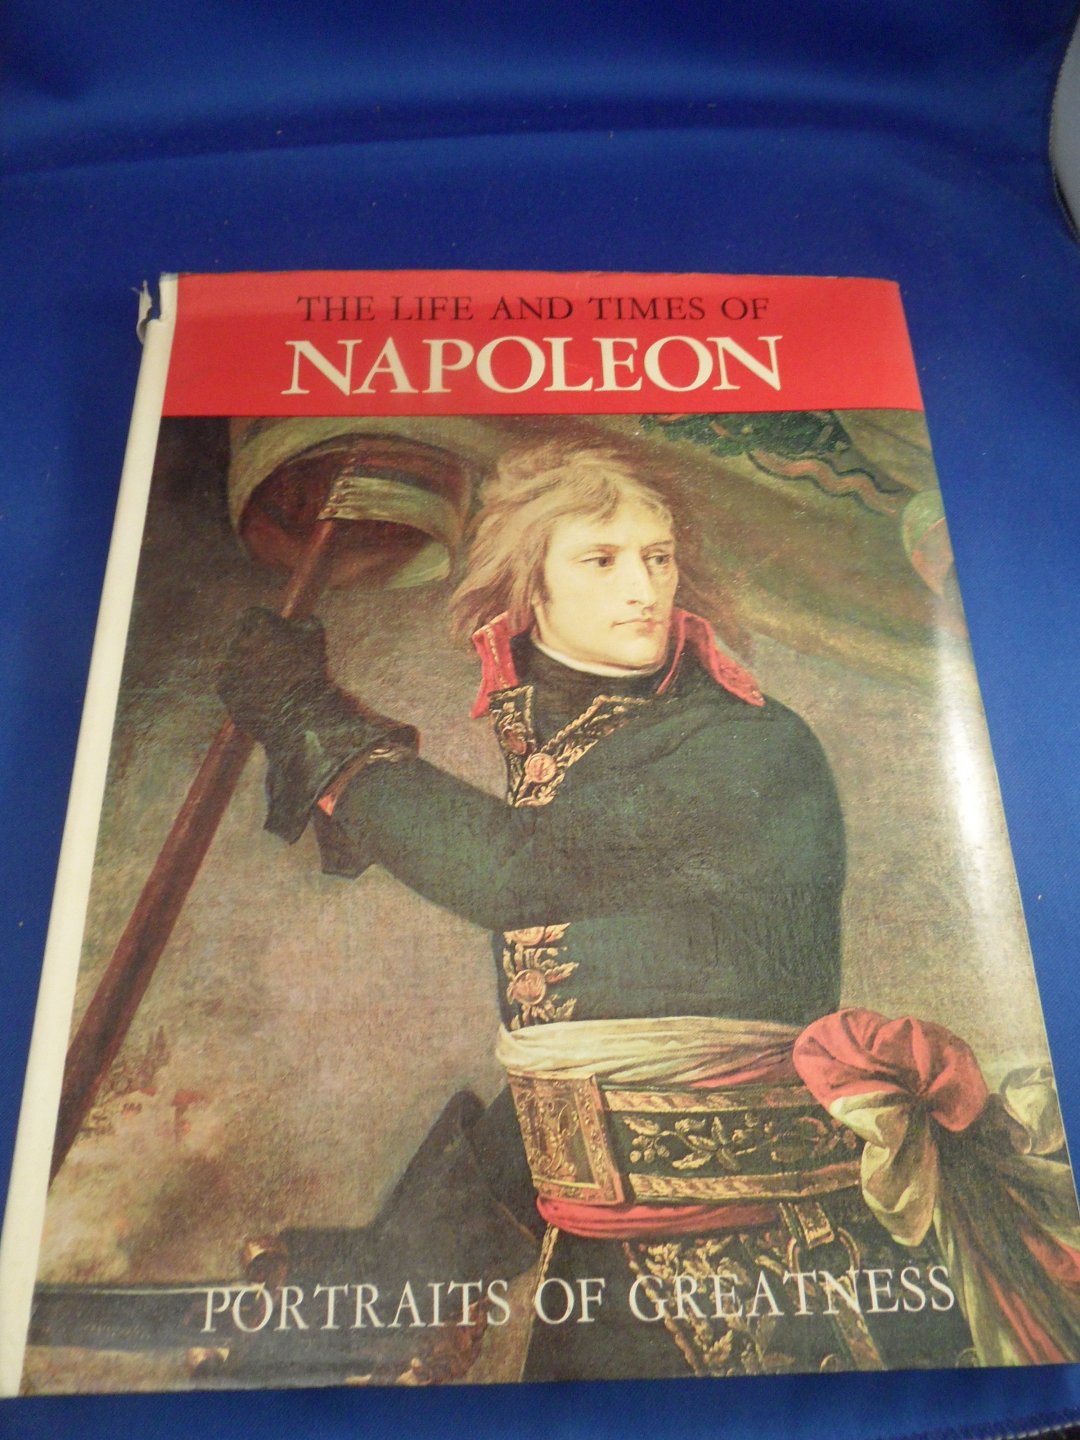 Orlandi, Dr Enzo - The Life and Times of Napoleon. Portraits of greatness